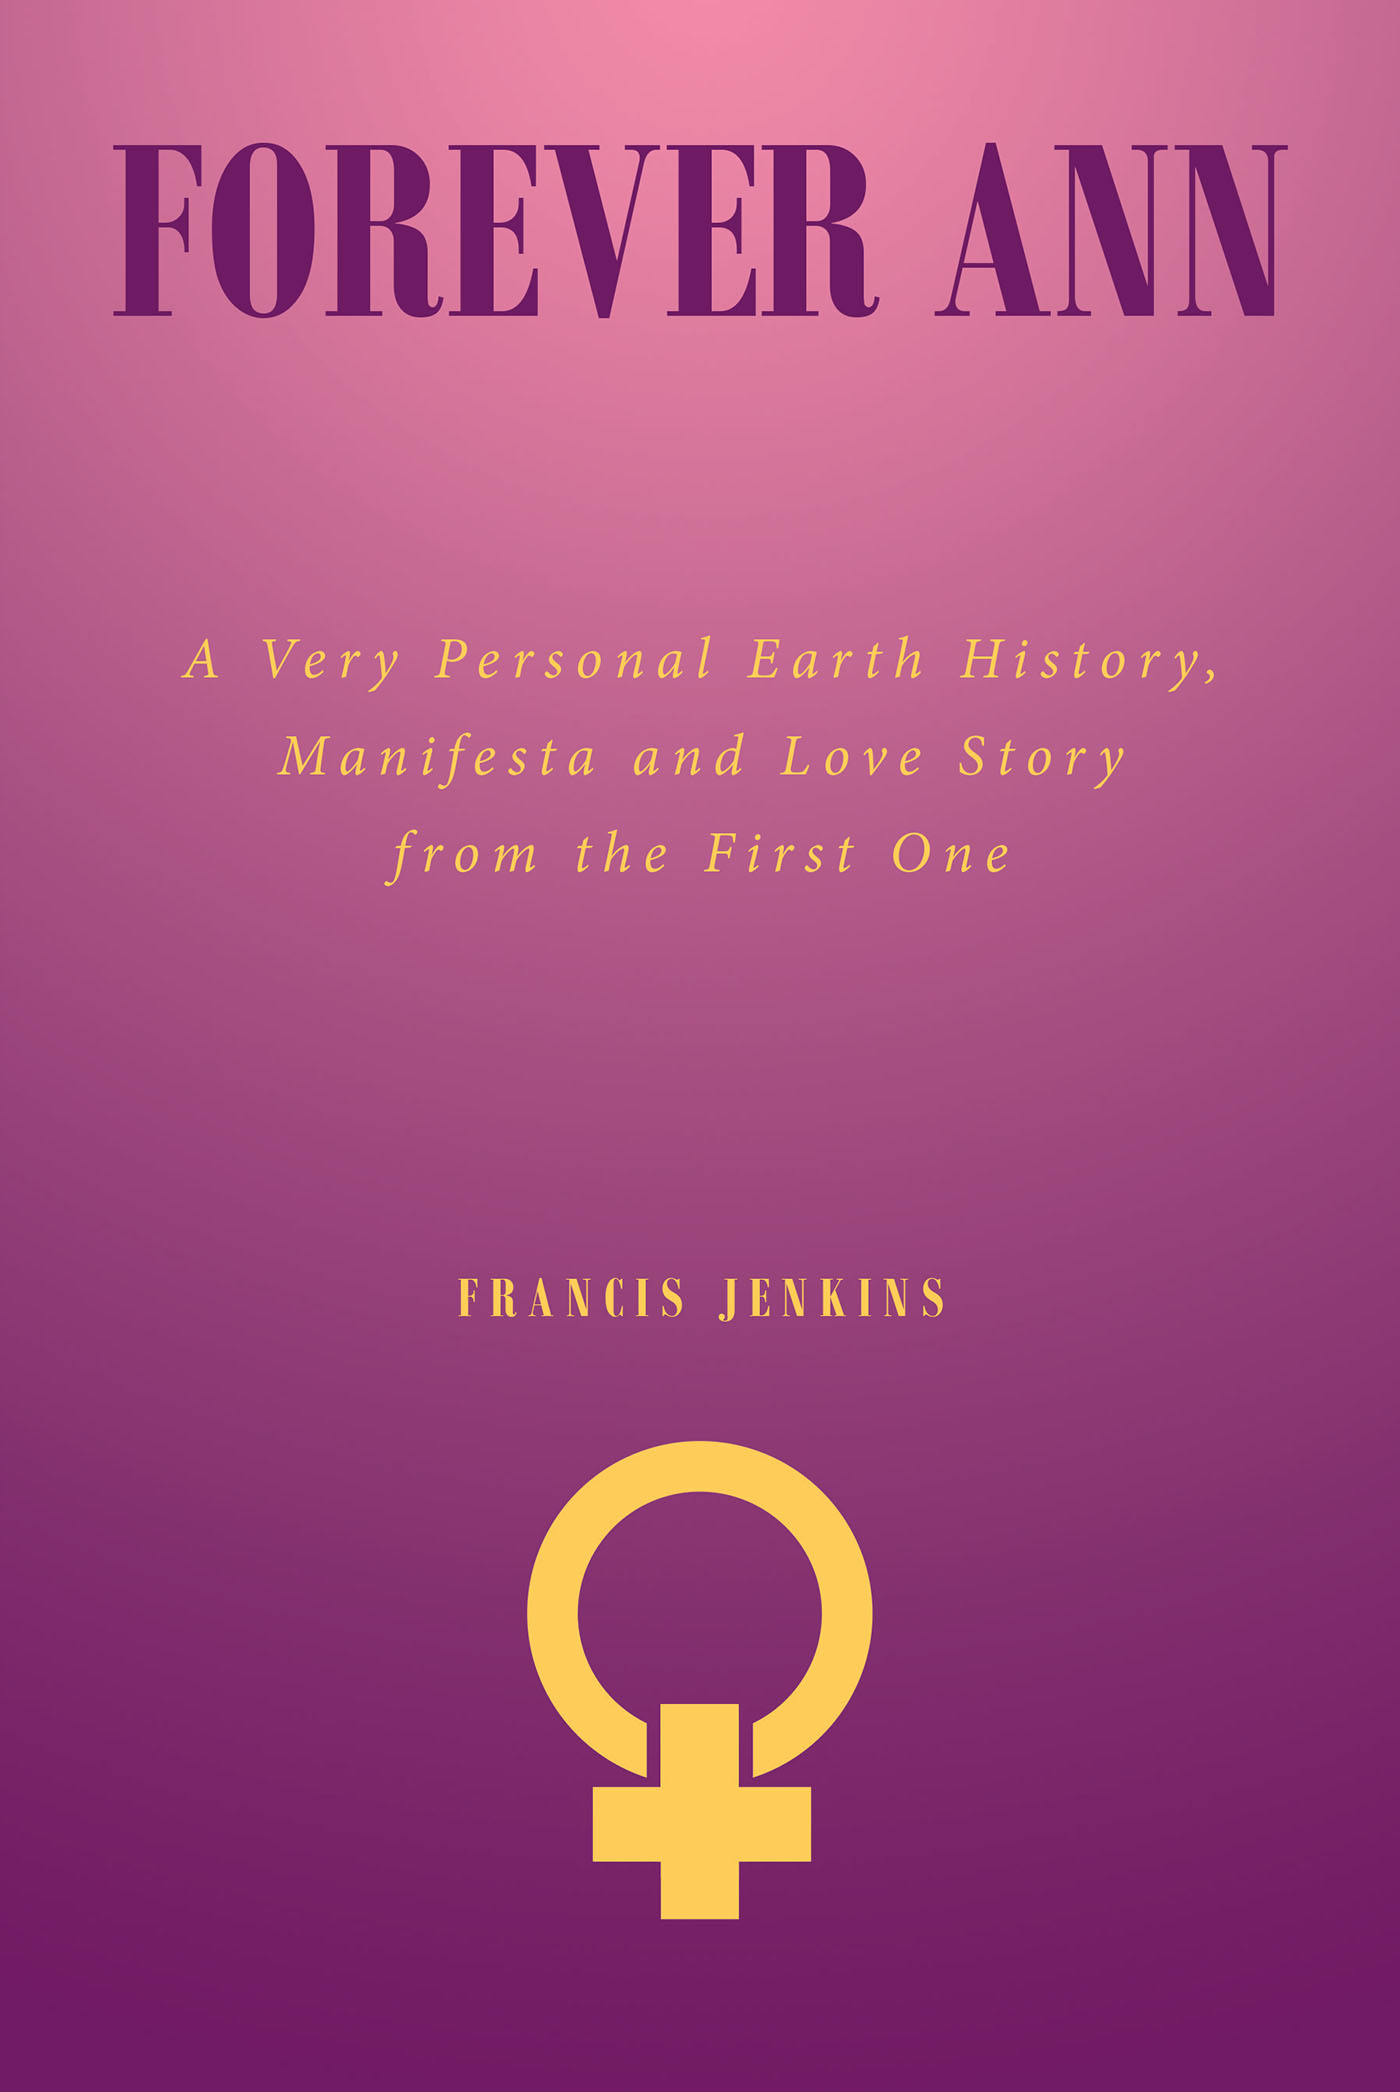 Francis Jenkins’s New Book, “Forever Ann: A Very Personal Earth History, Manifesta and Love Story from the First One,” Follows a Woman’s New Life with Immortality